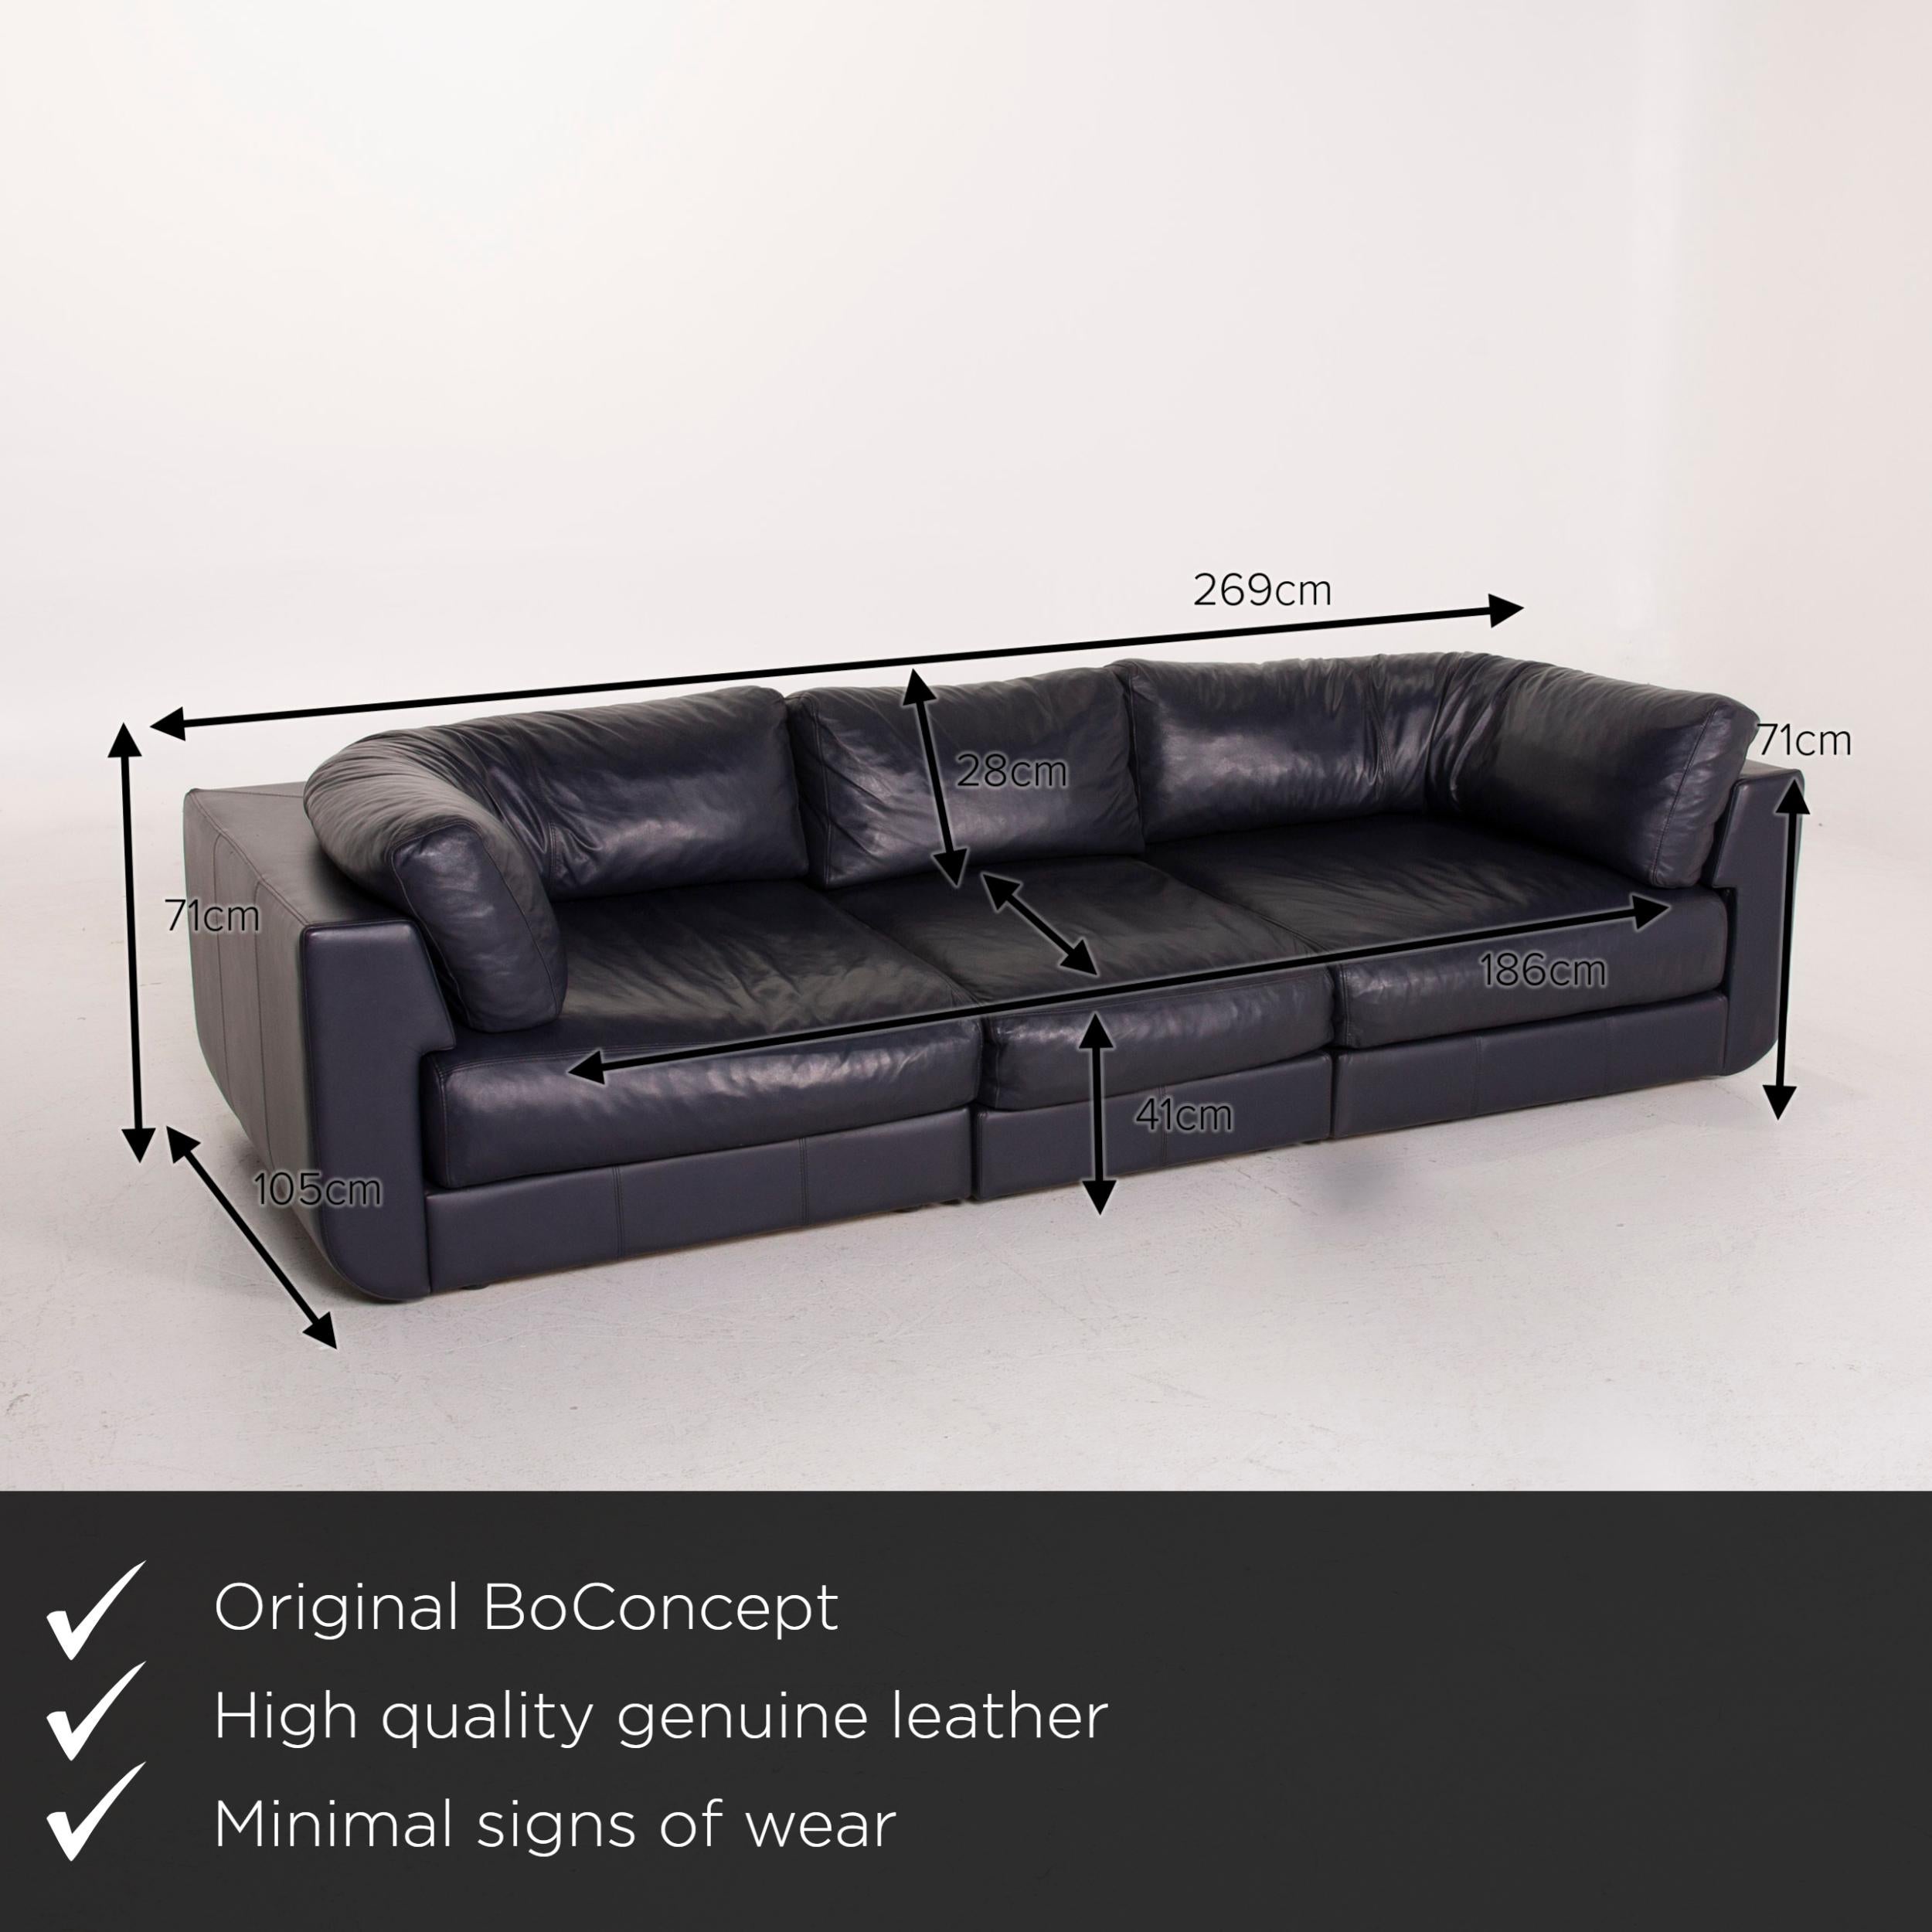 We present to you a BoConcept Largo leather sofa set blue three-seat stool.

 

 Product measurements in centimetres:
 

 depth: 105
 width: 269
 height: 71
 seat height: 41
 rest height: 71
 seat depth: 60
 seat width: 186
 back